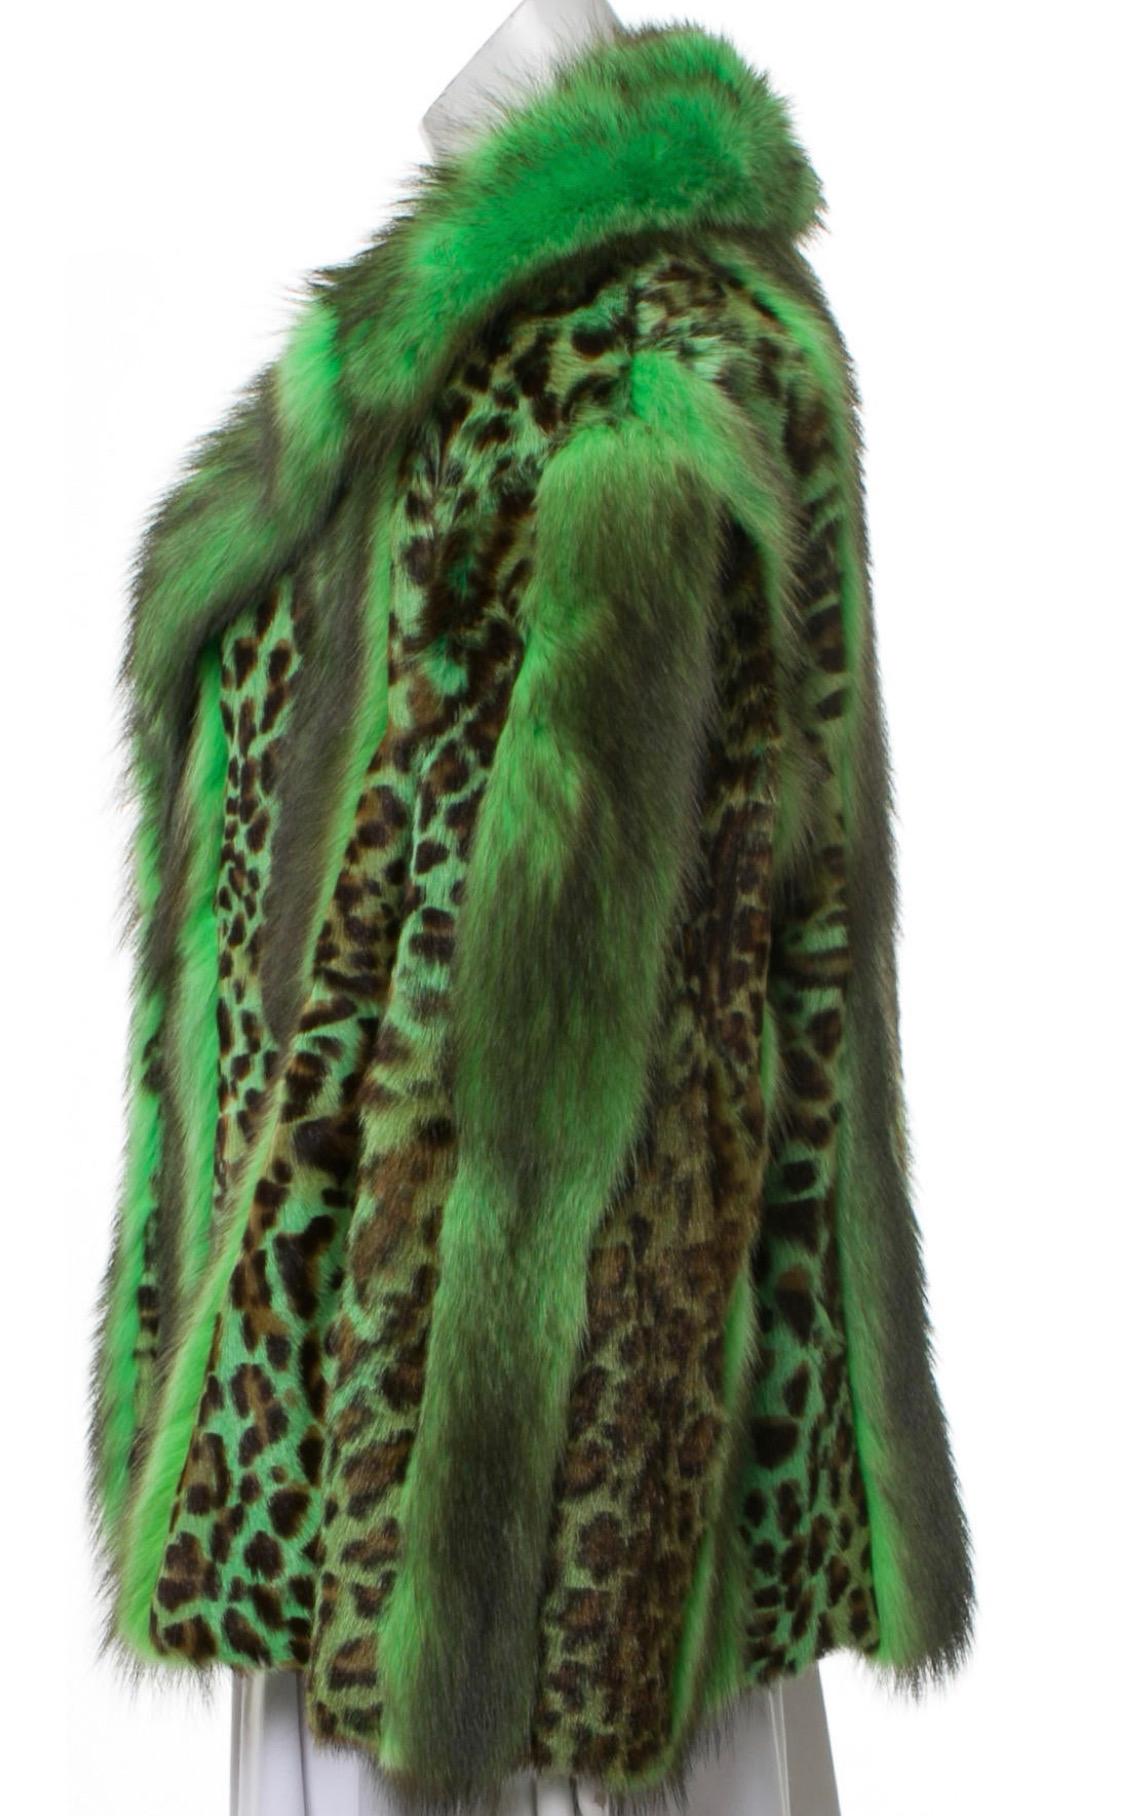 Versace Neon Green Leopard Print Goat Fur Inarsia Jacket.
This is so good. More photos to follow.
 Swing style coat with wonderful generous proportions.
Leopard print fur is sheared close interspaced with long curly goat fur .
The pelts are